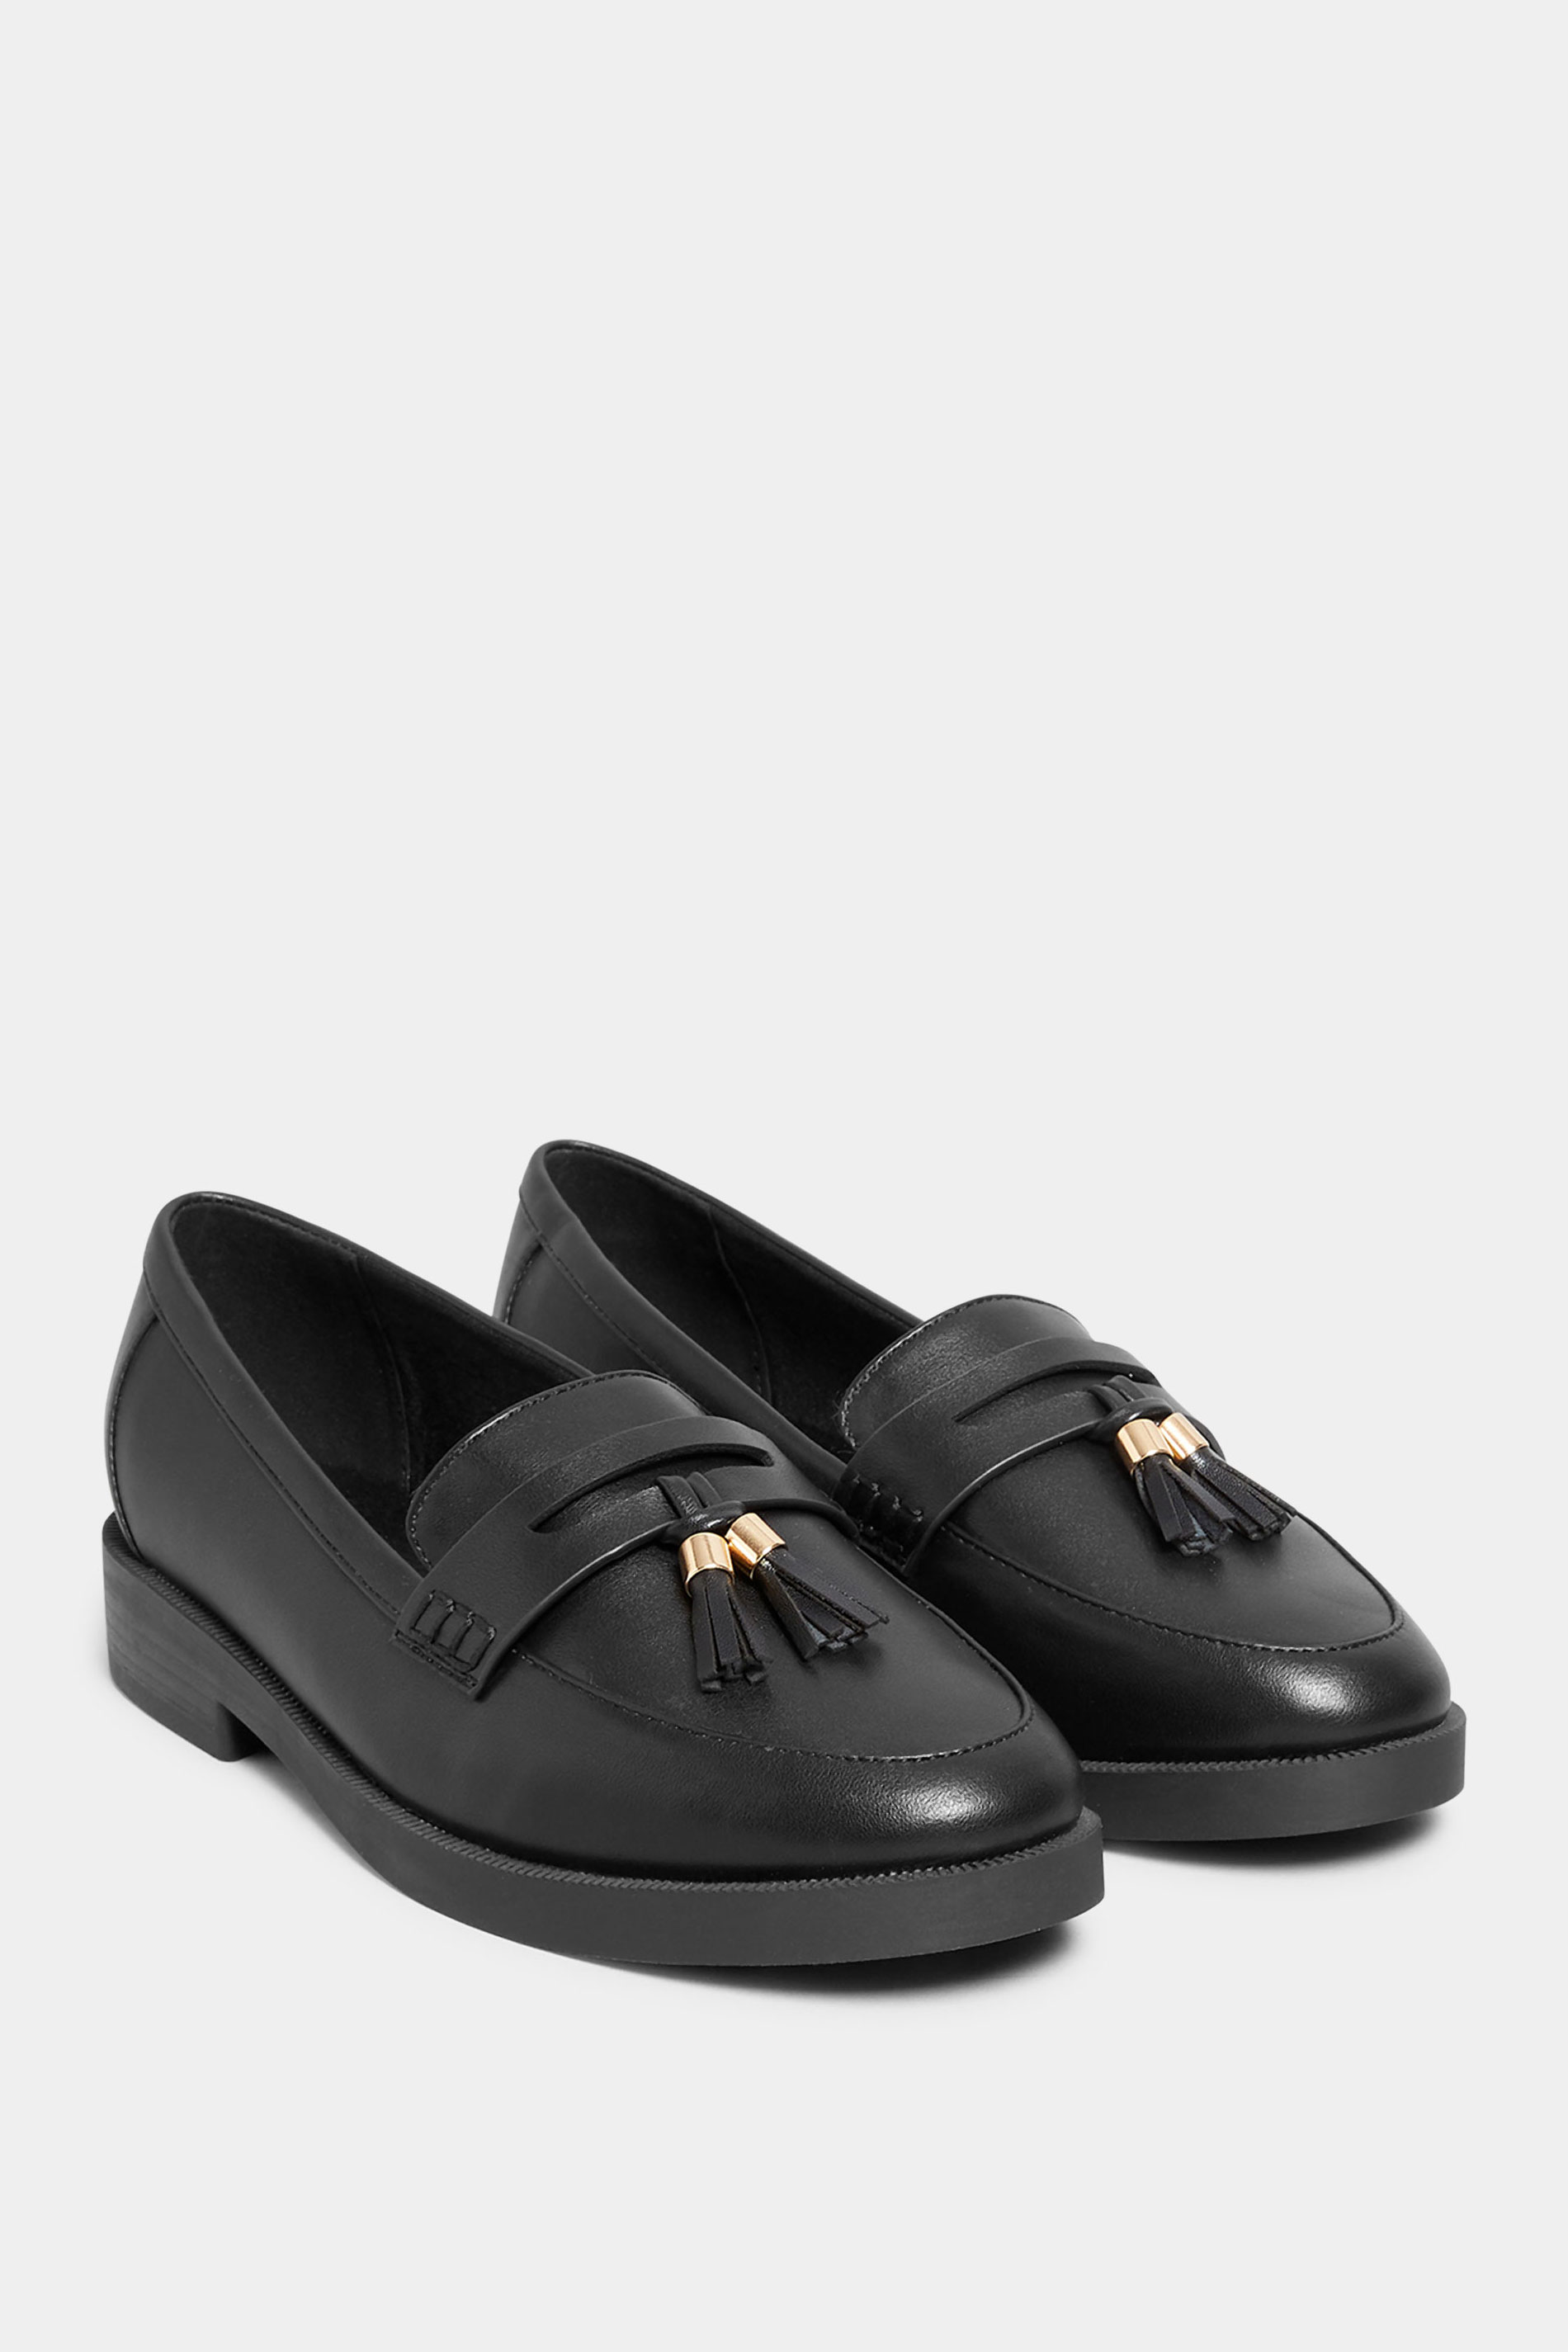 Black Faux Leather Tassel Loafers In Wide E Fit & Extra Wide EEE Fit | Yours Clothing 2